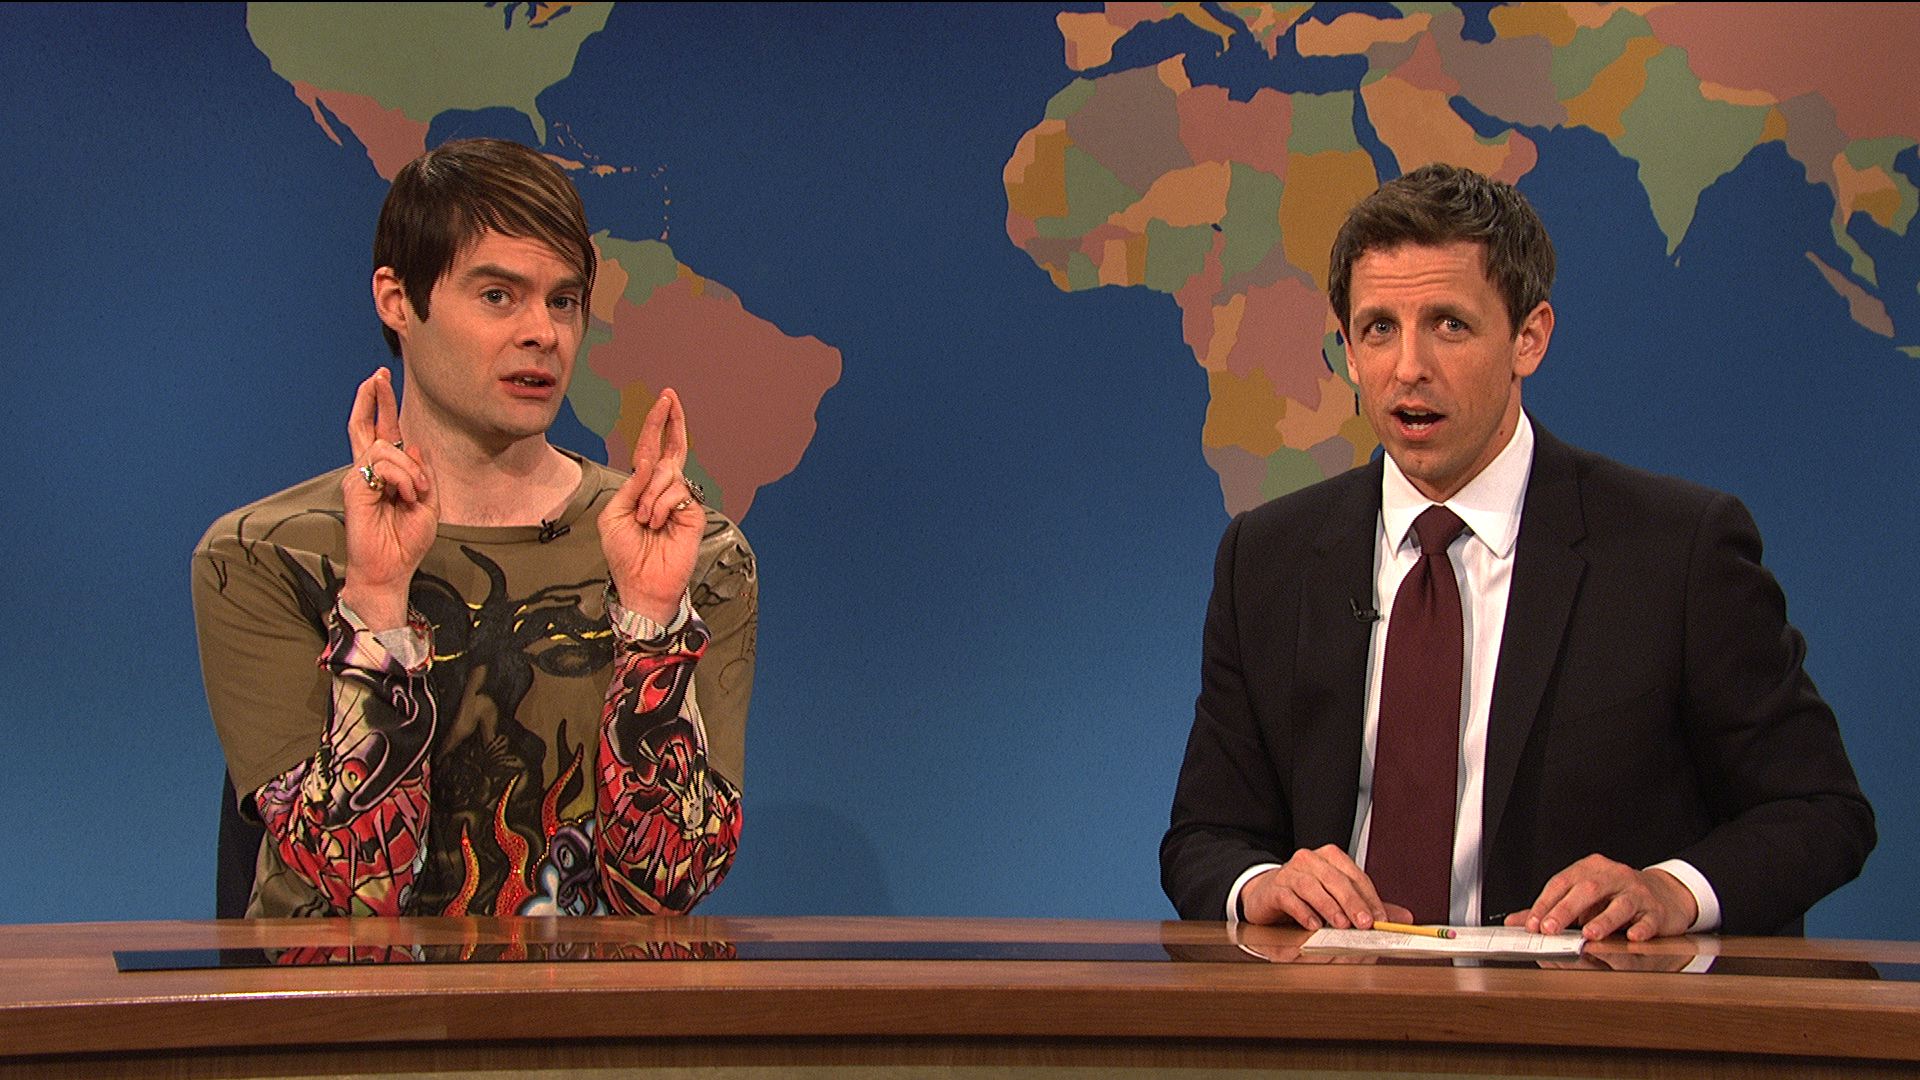 Watch Saturday Night Live Highlight Weekend Update Stefon On Spring Break S Hottest Tips Nbc Com